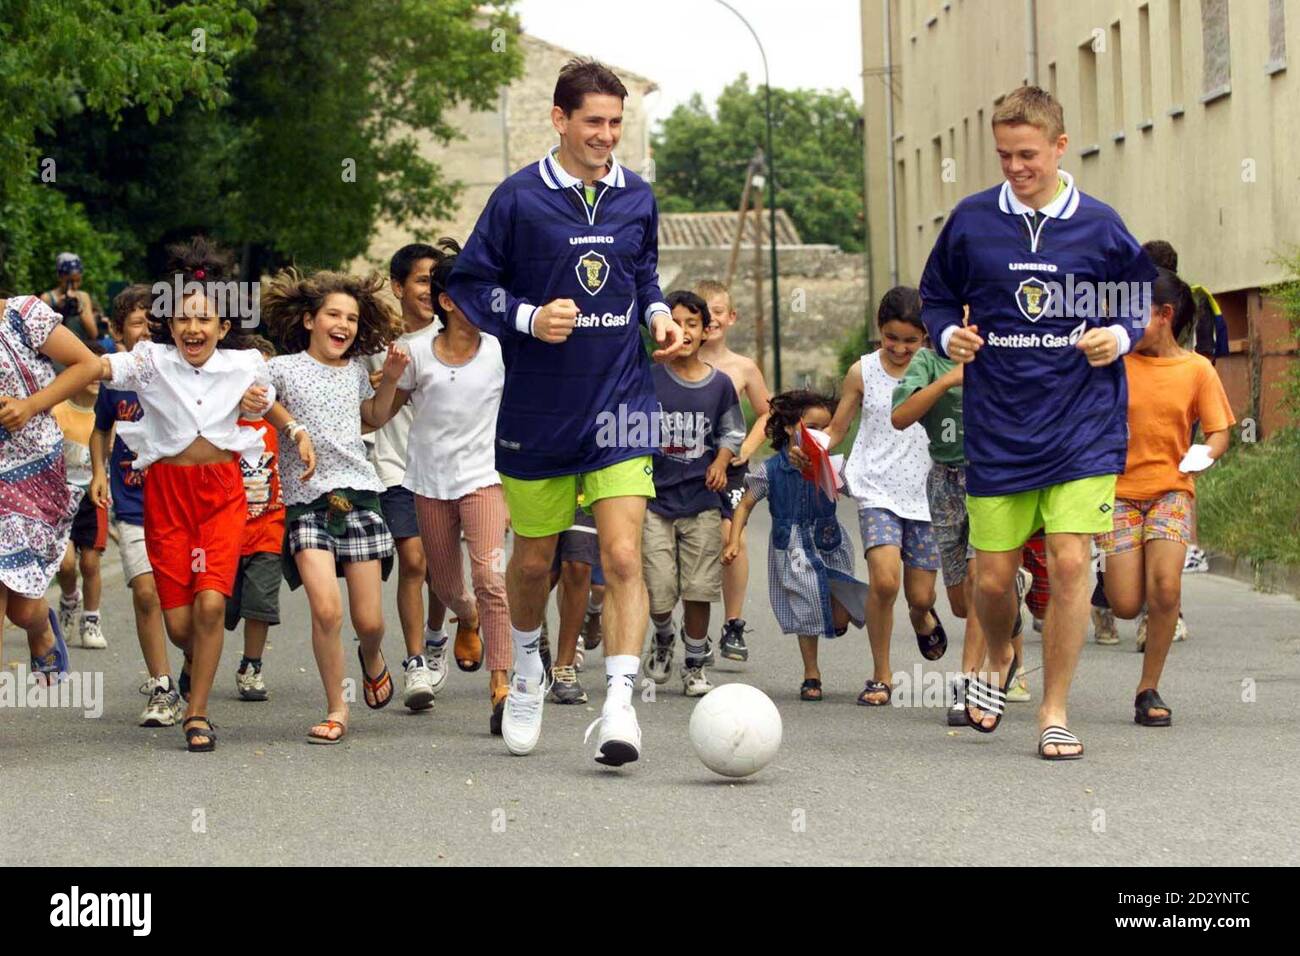 Scotland's soccer stars Jackie McNamara (left ) and Simon Donnelly showing local kids how to handle a ball in St. Remy today (Sunday) only days before their first World Cup match. EDI Photo by Chris Bacon/PA Stock Photo